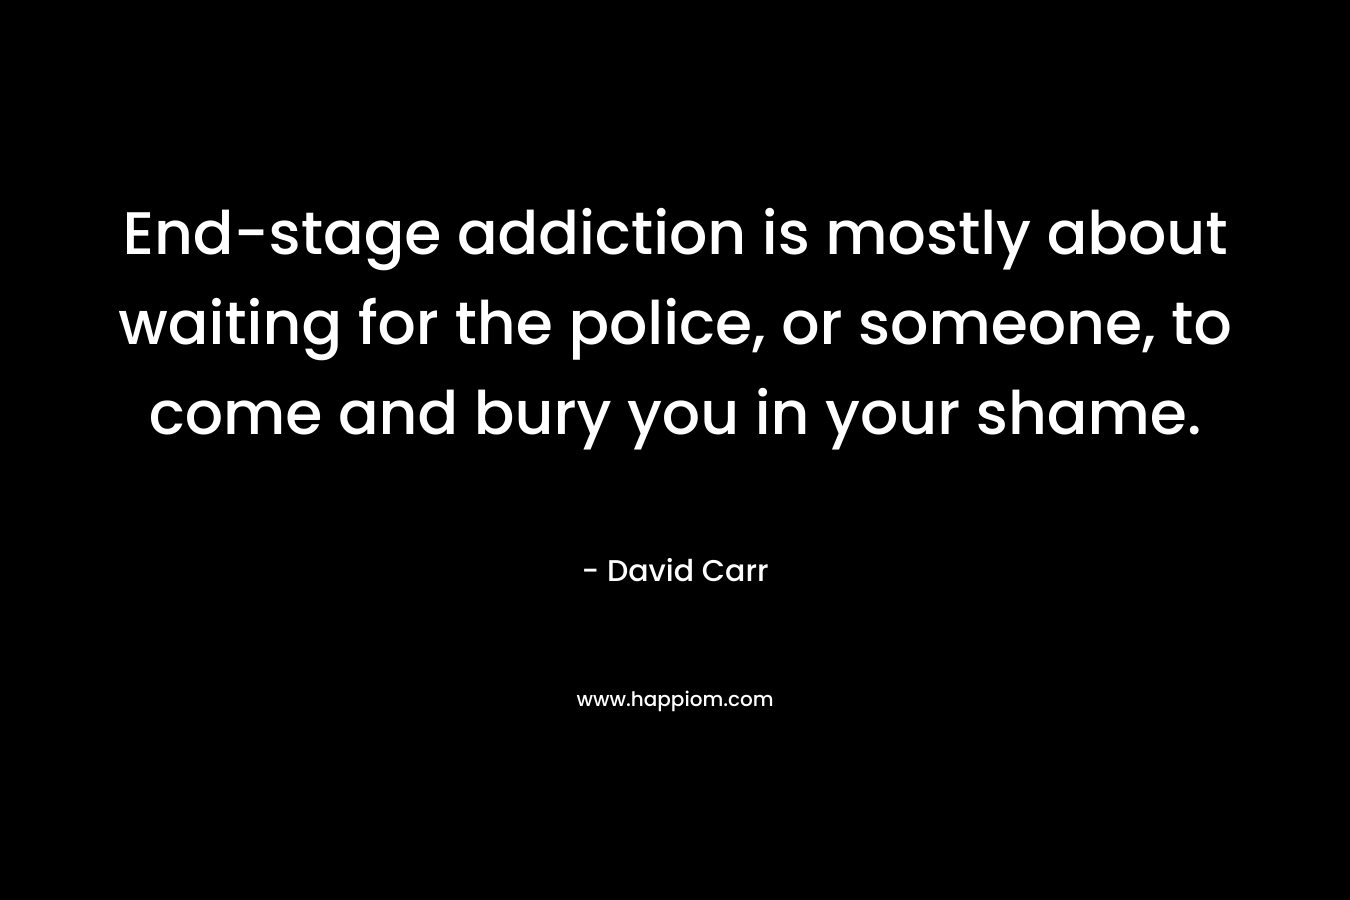 End-stage addiction is mostly about waiting for the police, or someone, to come and bury you in your shame. – David Carr